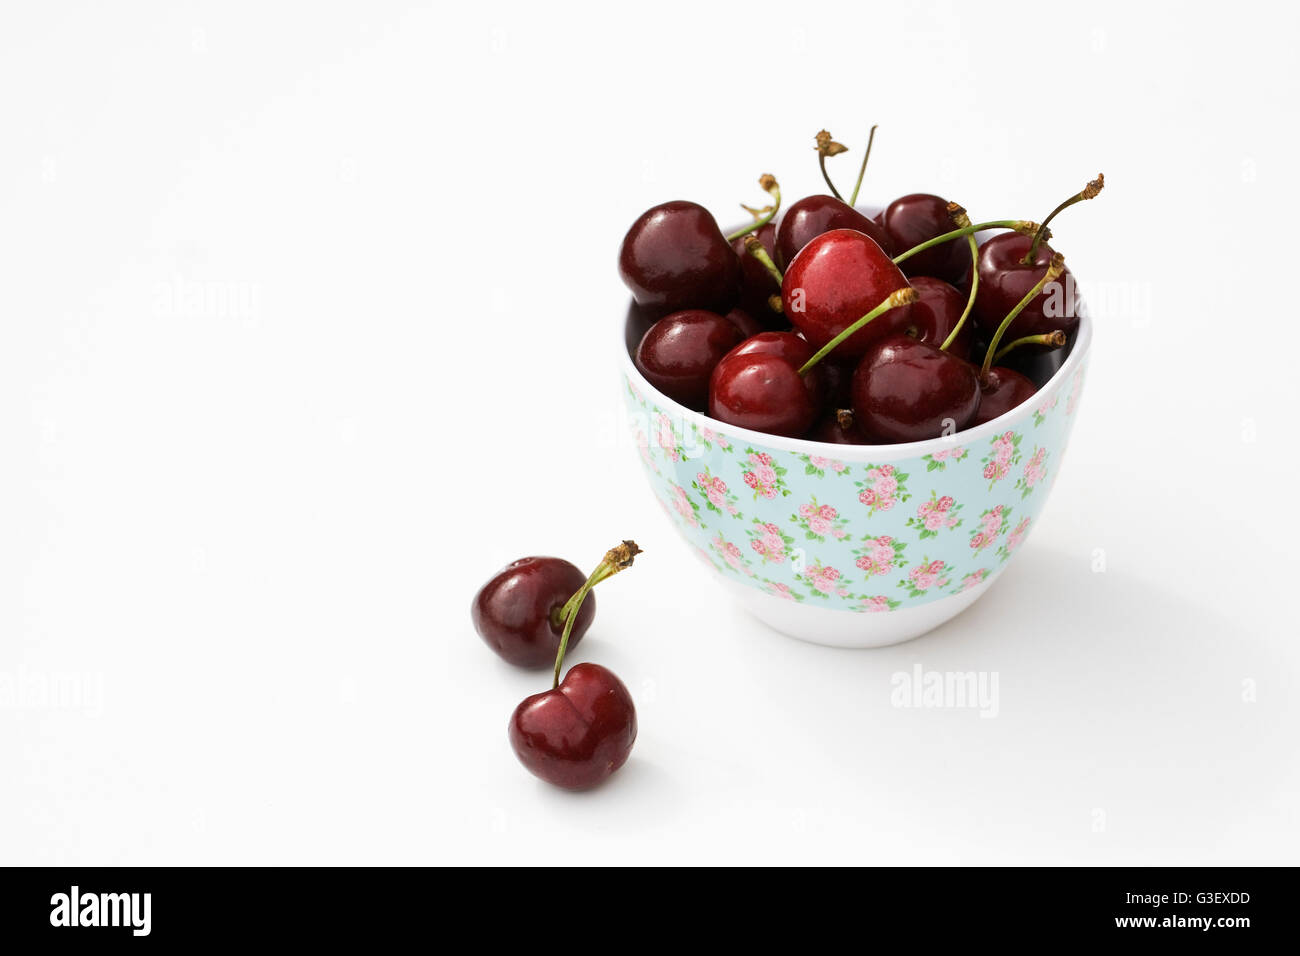 Fresh cherries in a bowl on a white background. Stock Photo